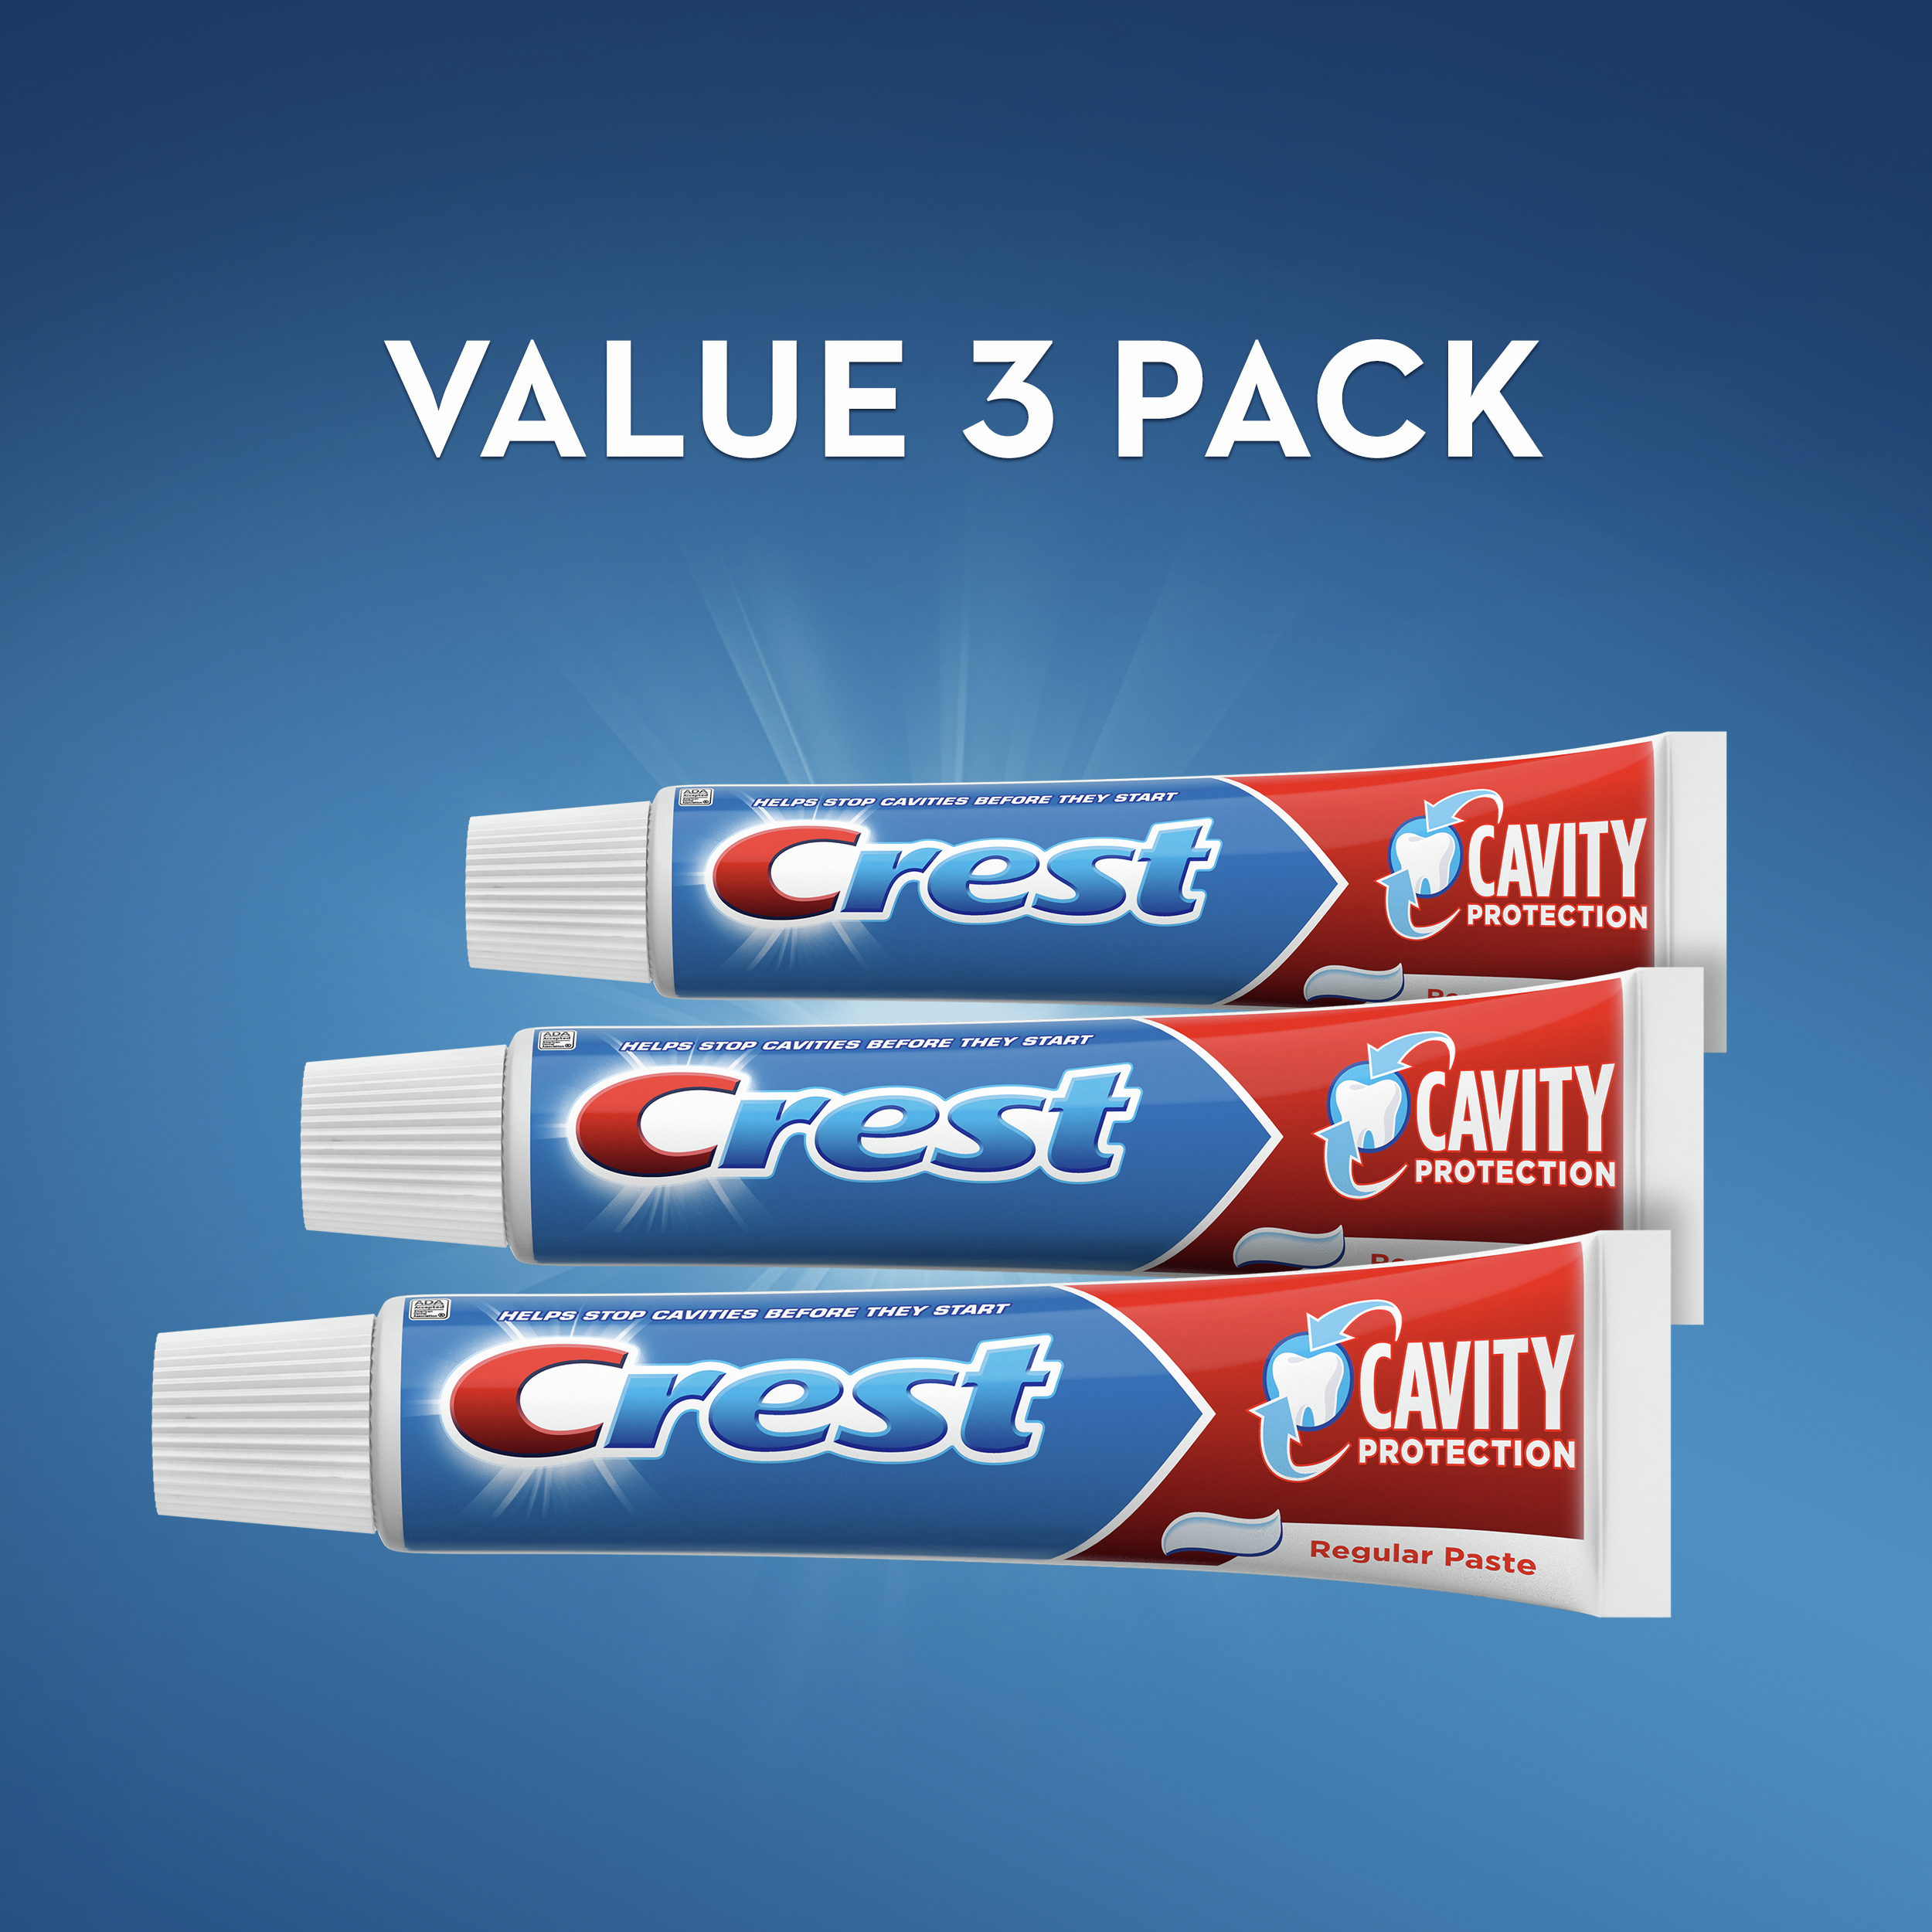 Crest Cavity Protection Toothpaste, Regular Paste, 5.7 oz, 3 Pack - image 6 of 7